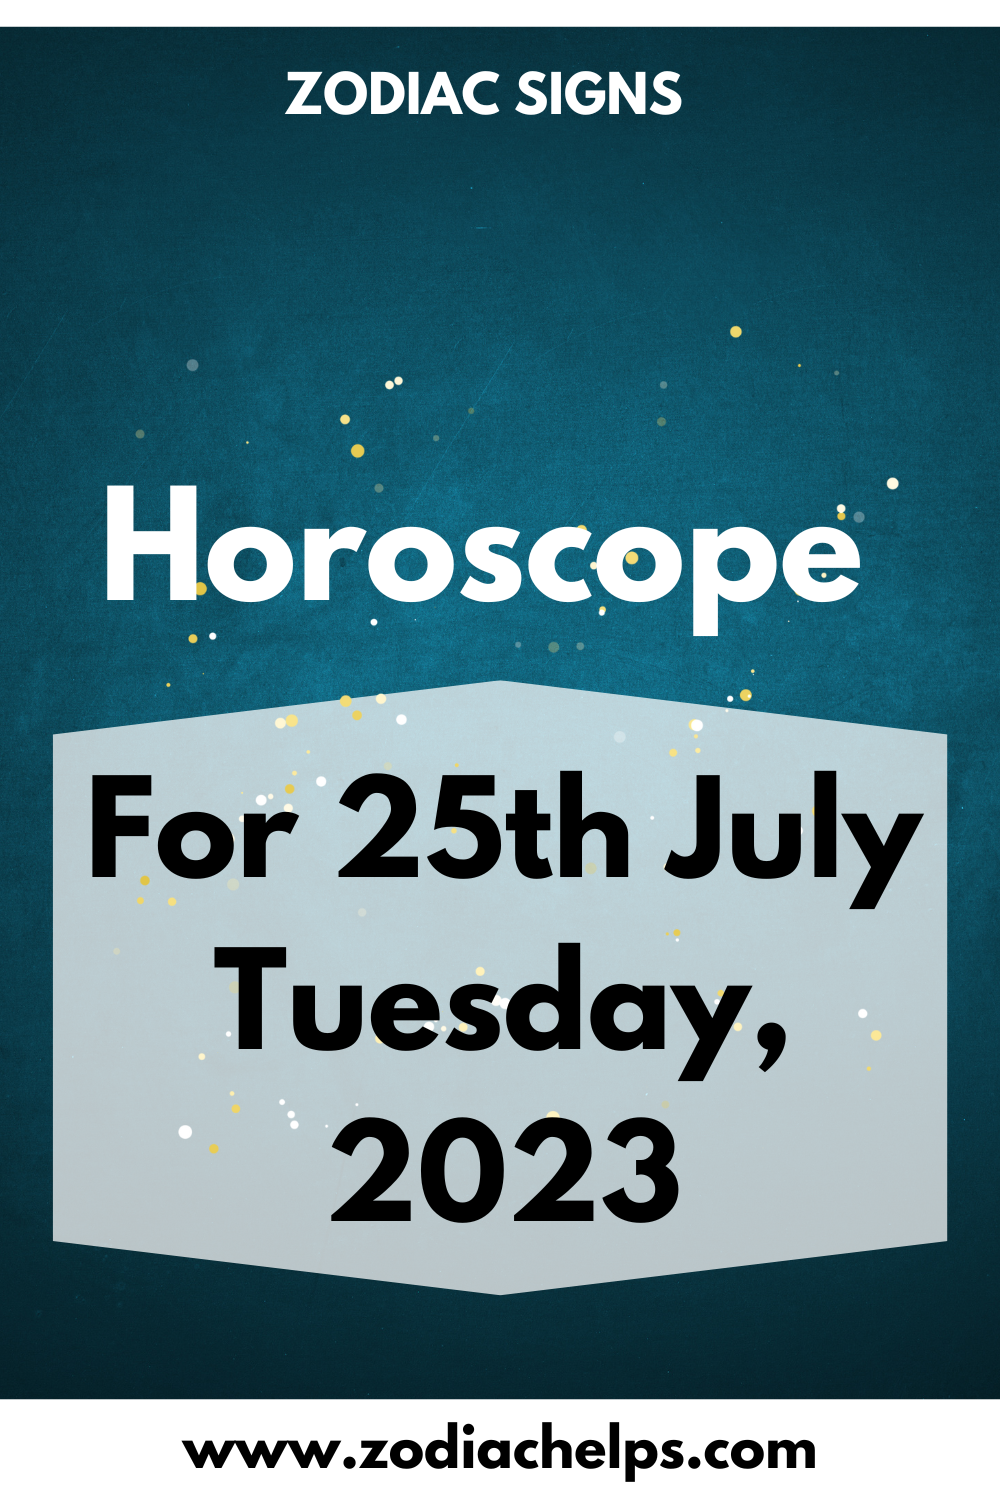 Horoscope for 25th July Tuesday, 2023